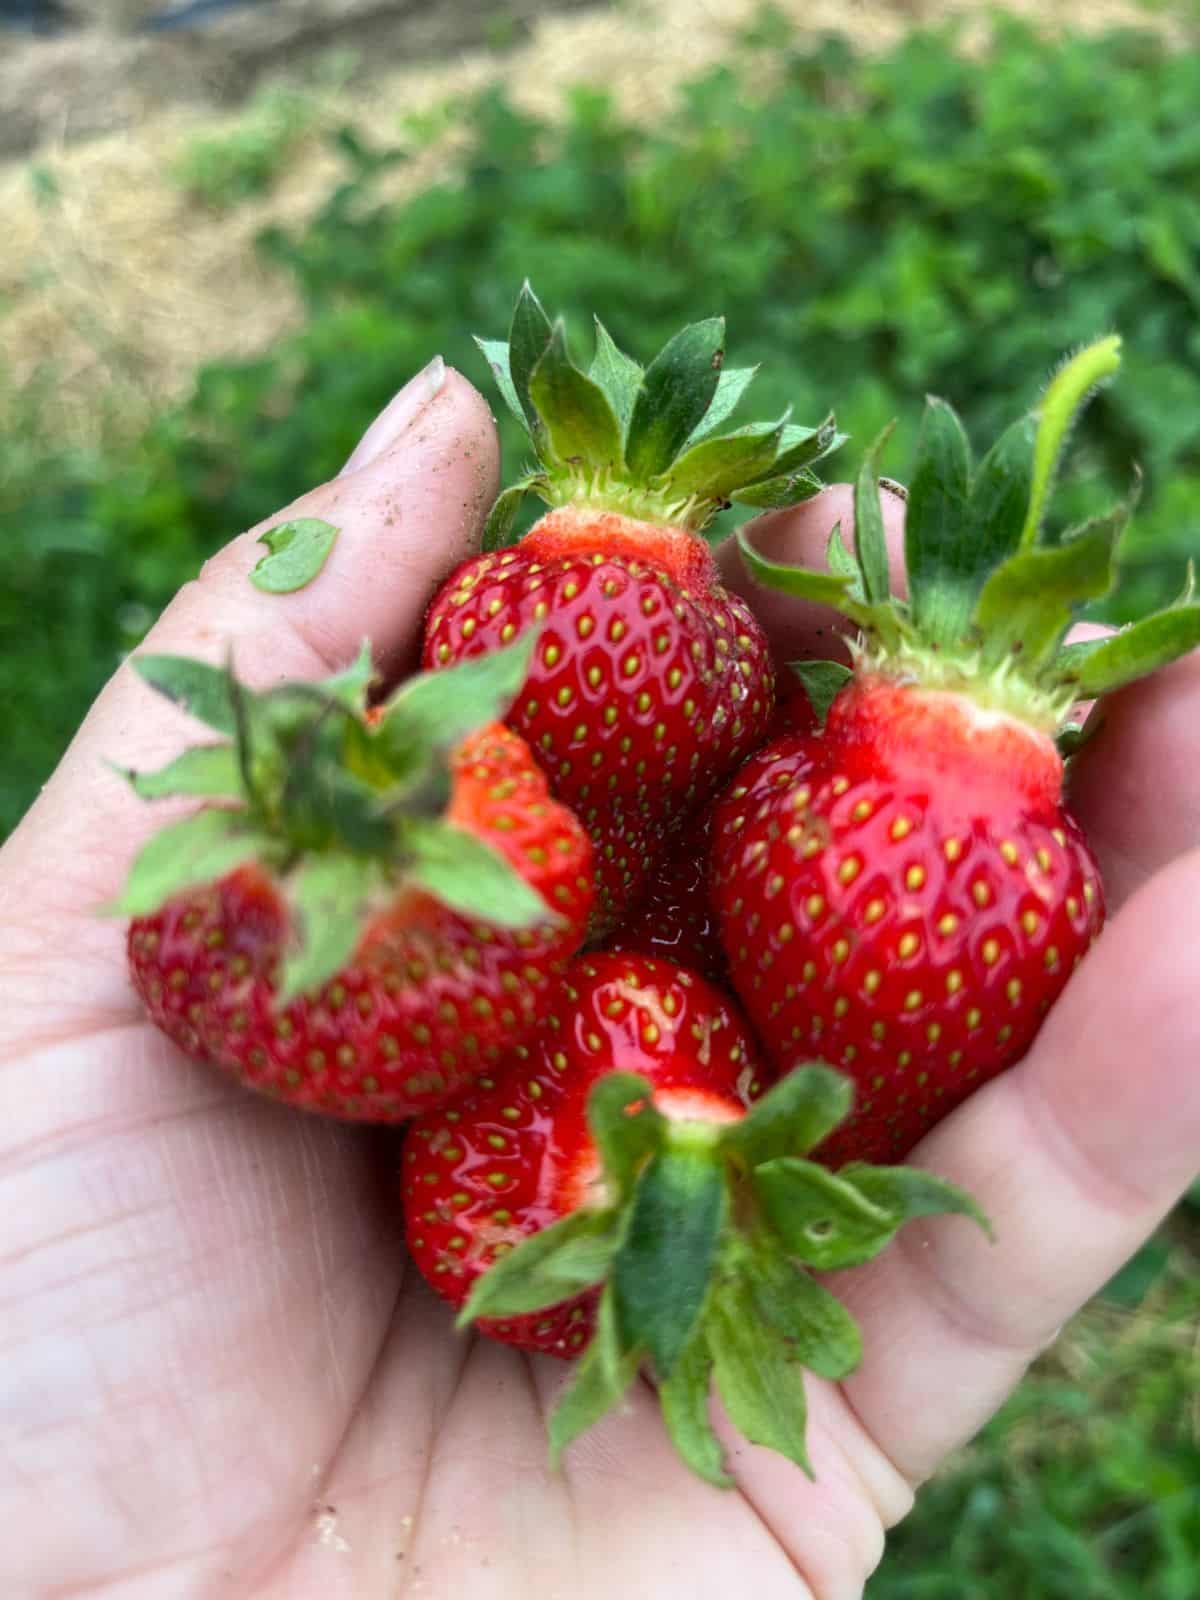 A gardener holds fresh picked strawberries in the hand